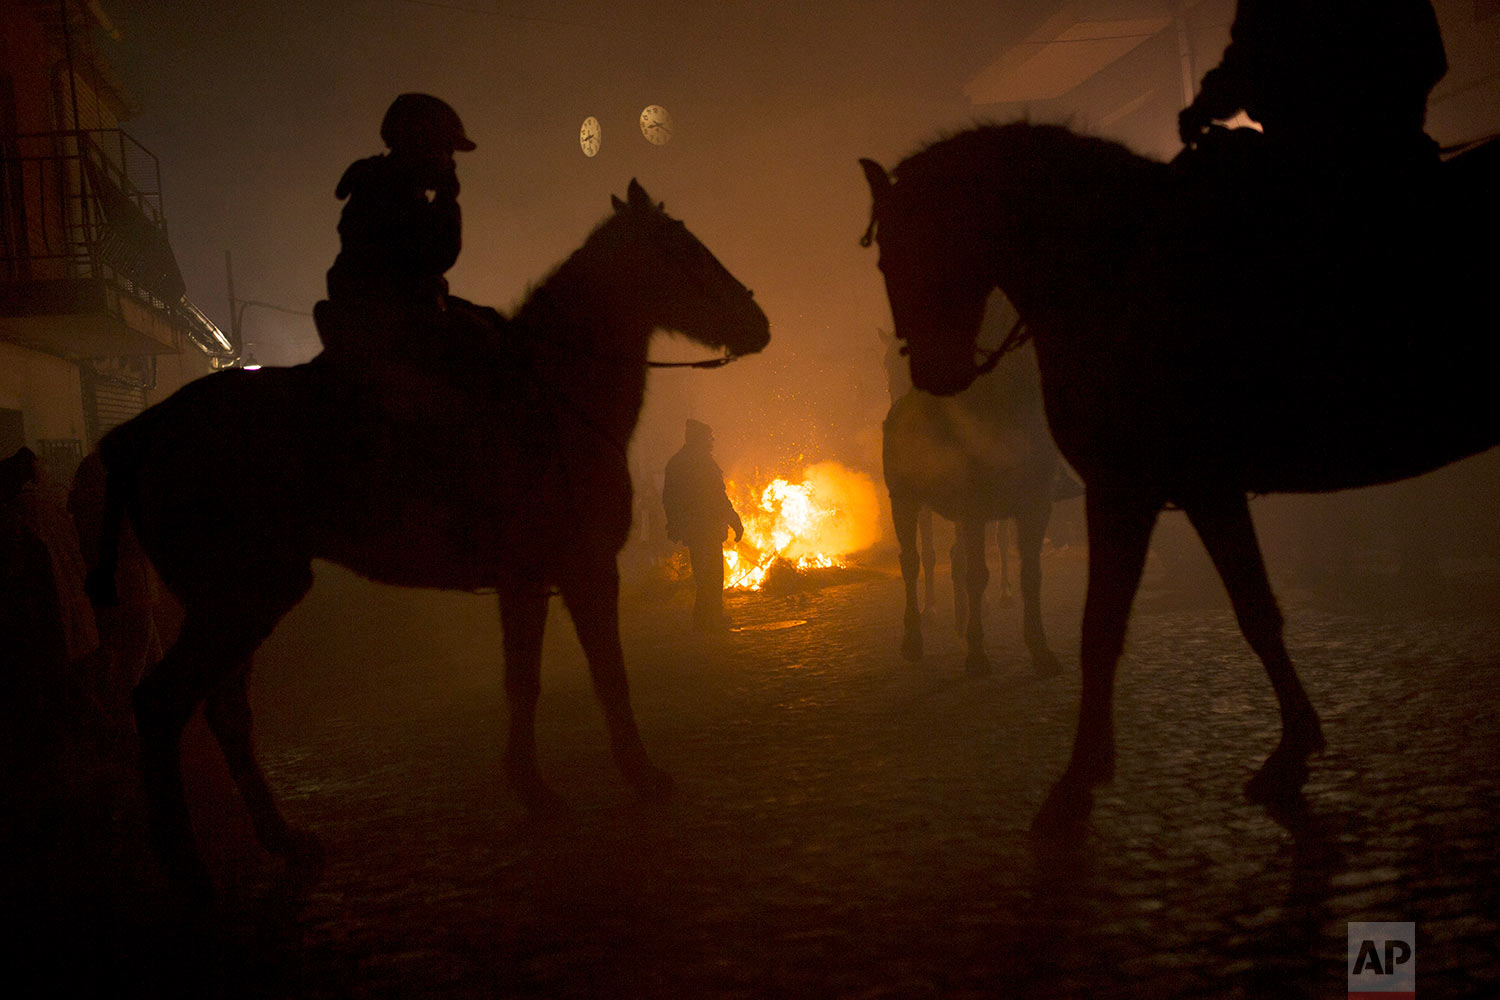  Riders and horses stand by bonfires prior the ritual in honor of Saint Anthony the Abbot, the patron saint of animals, in San Bartolome de Pinares, Spain, Tuesday, Jan. 16, 2018. (AP Photo/Francisco Seco)&nbsp;|&nbsp; See these photos on AP Images  